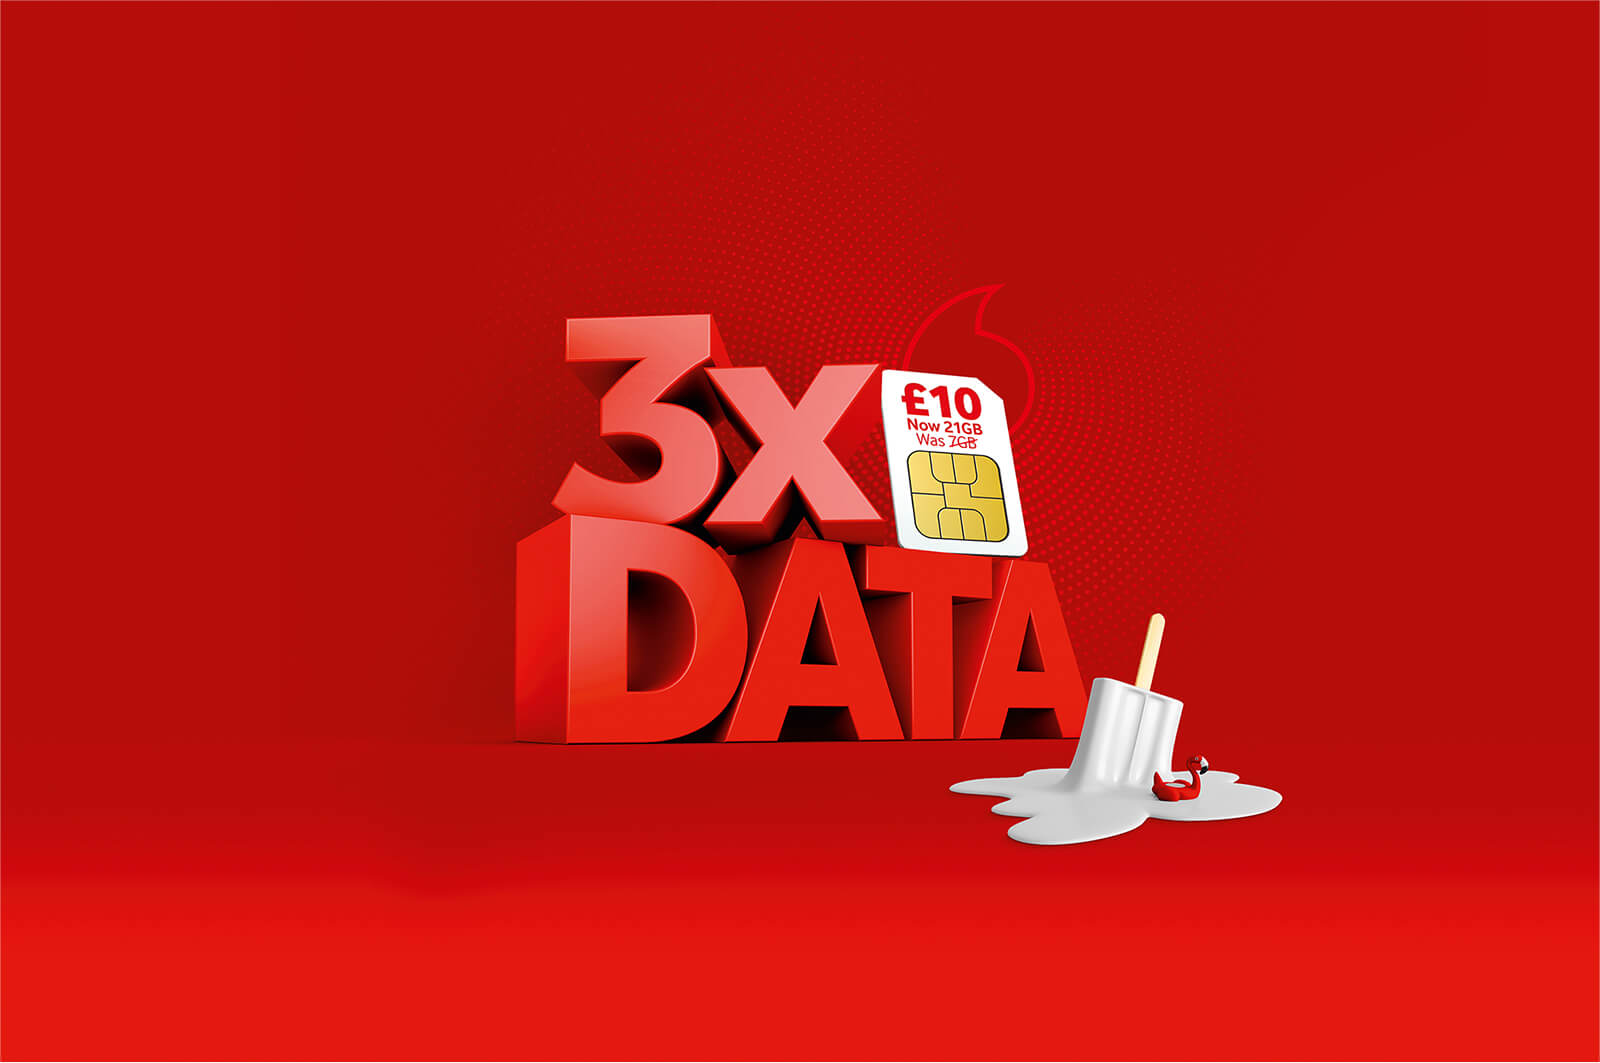 3x data for £10 Bundle